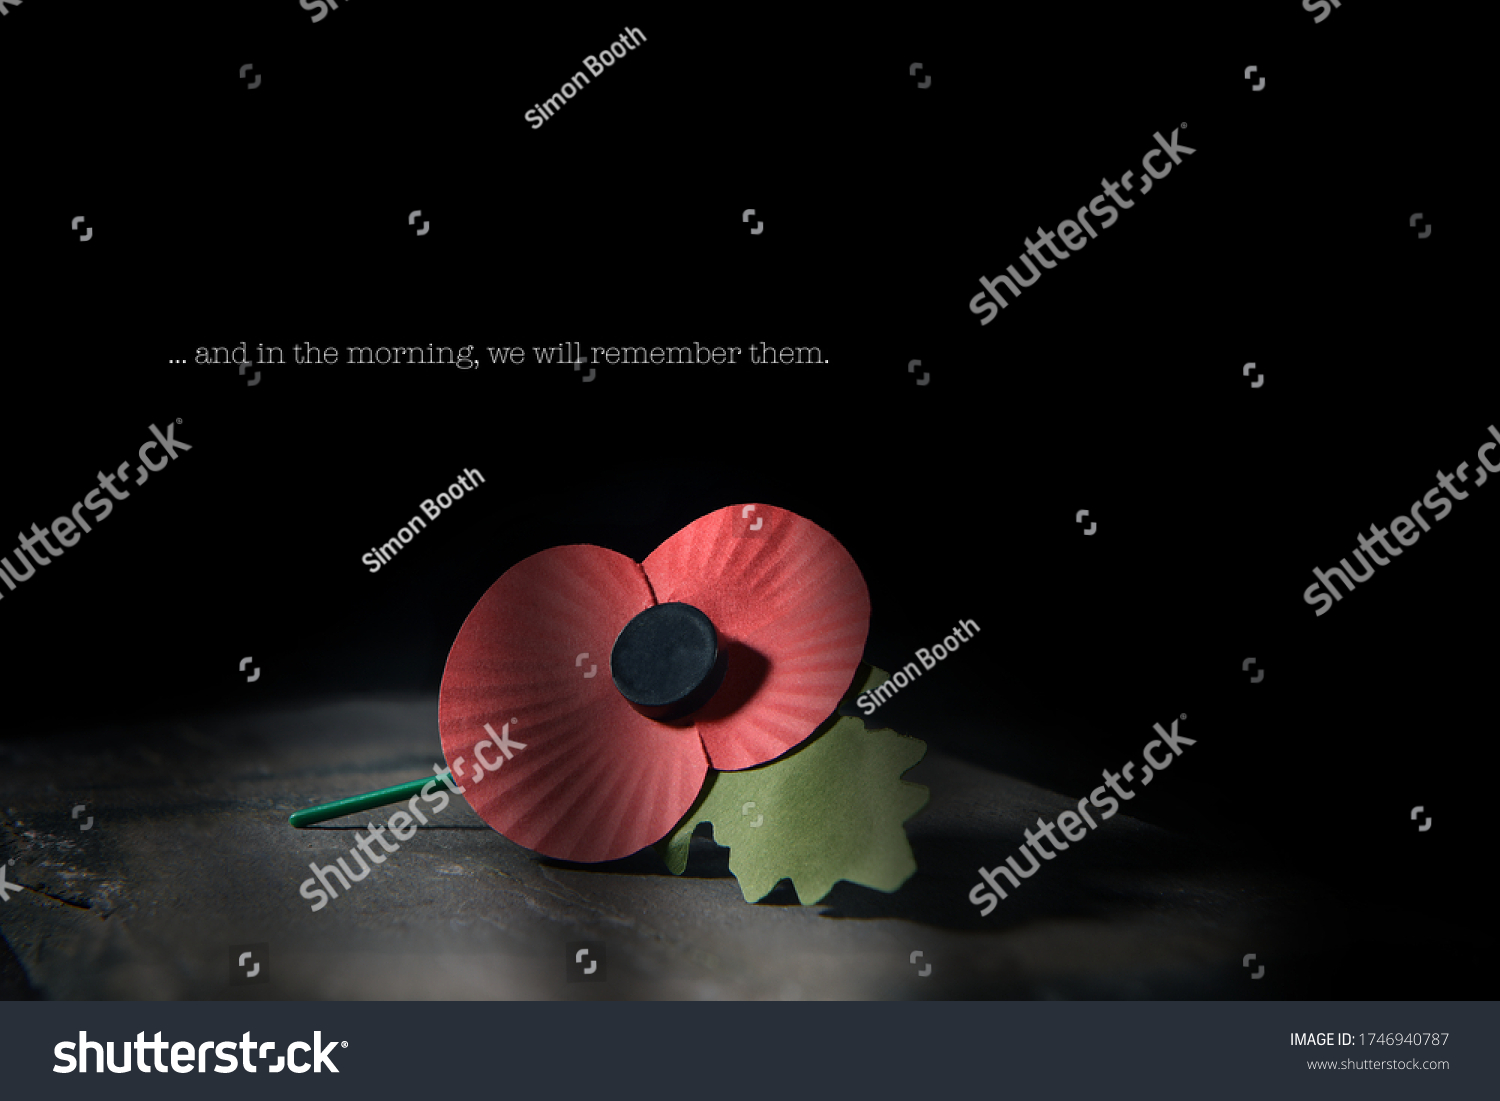 Creatively lit concept image for World War remembrance day where the red poppy is worn by millions around the world on their lapels as a symbol of remembrance to those fallen in war. Copy space. #1746940787